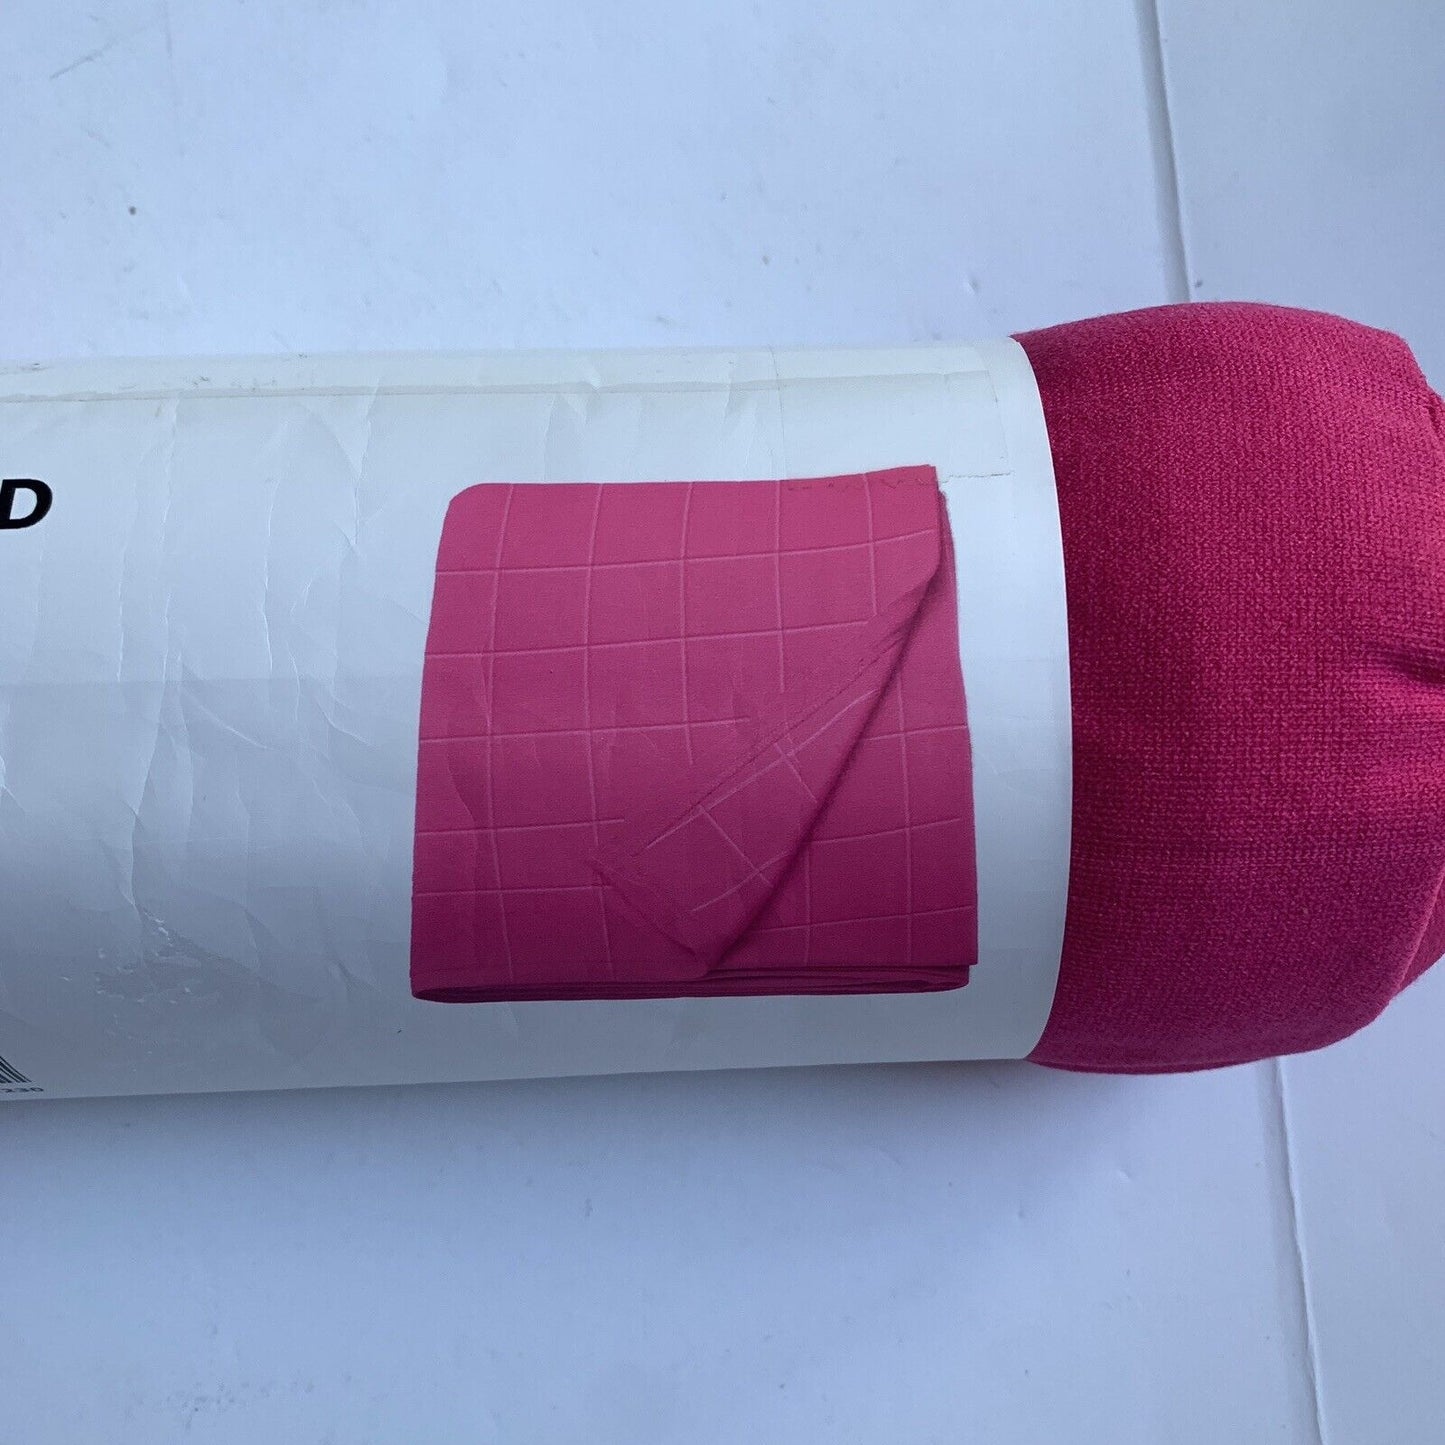 Ikea Oddhild Throw Blanket PINK New in Package 47 x 67"